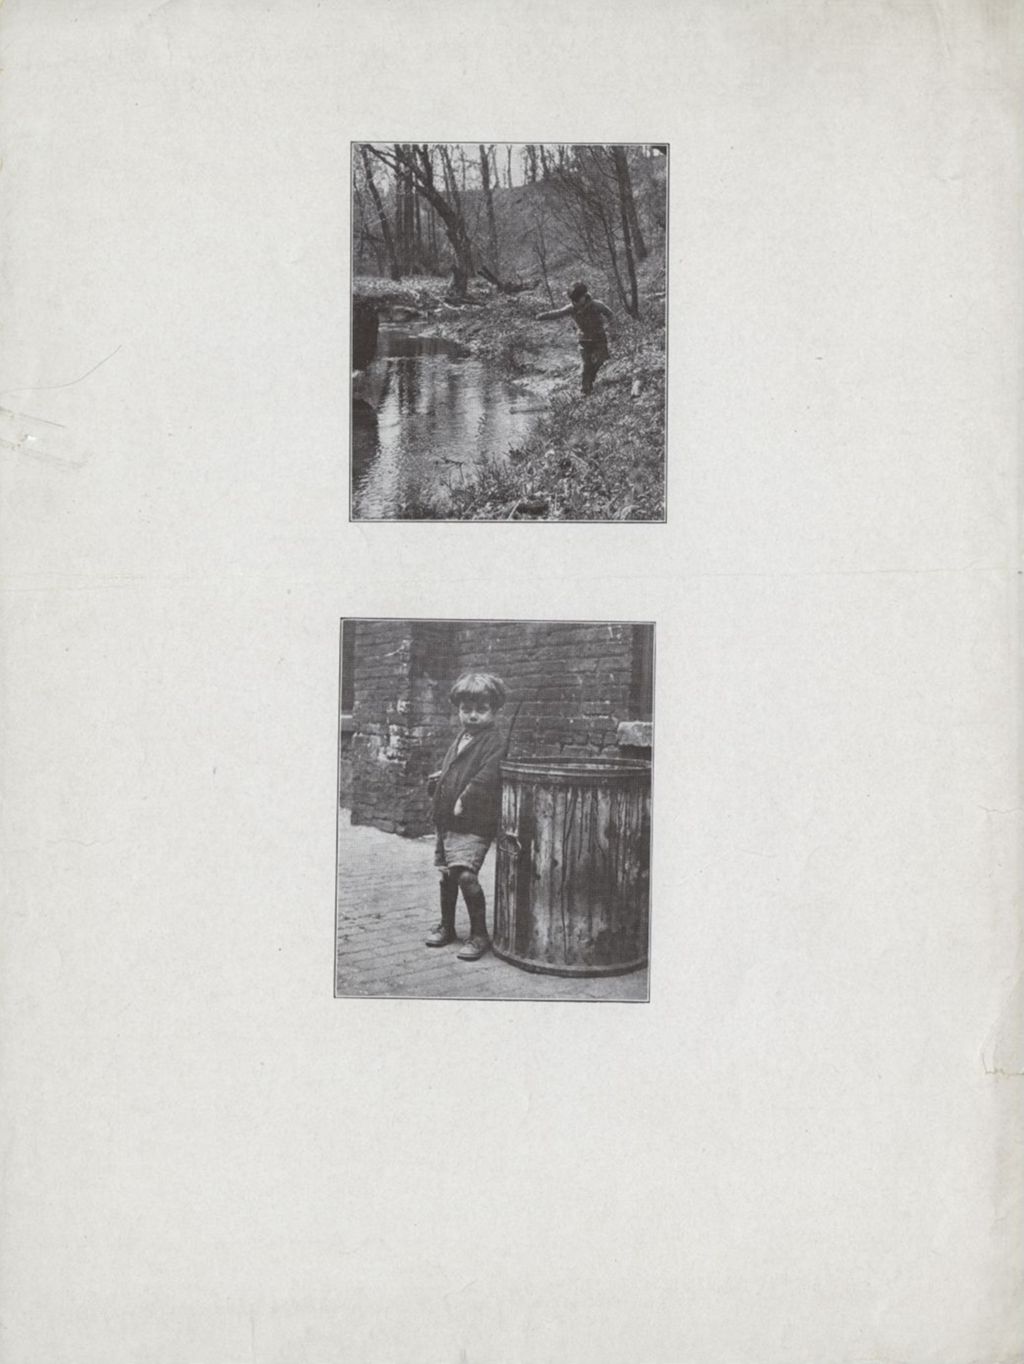 Two photos of a boy, one photo in woods, one in city alley